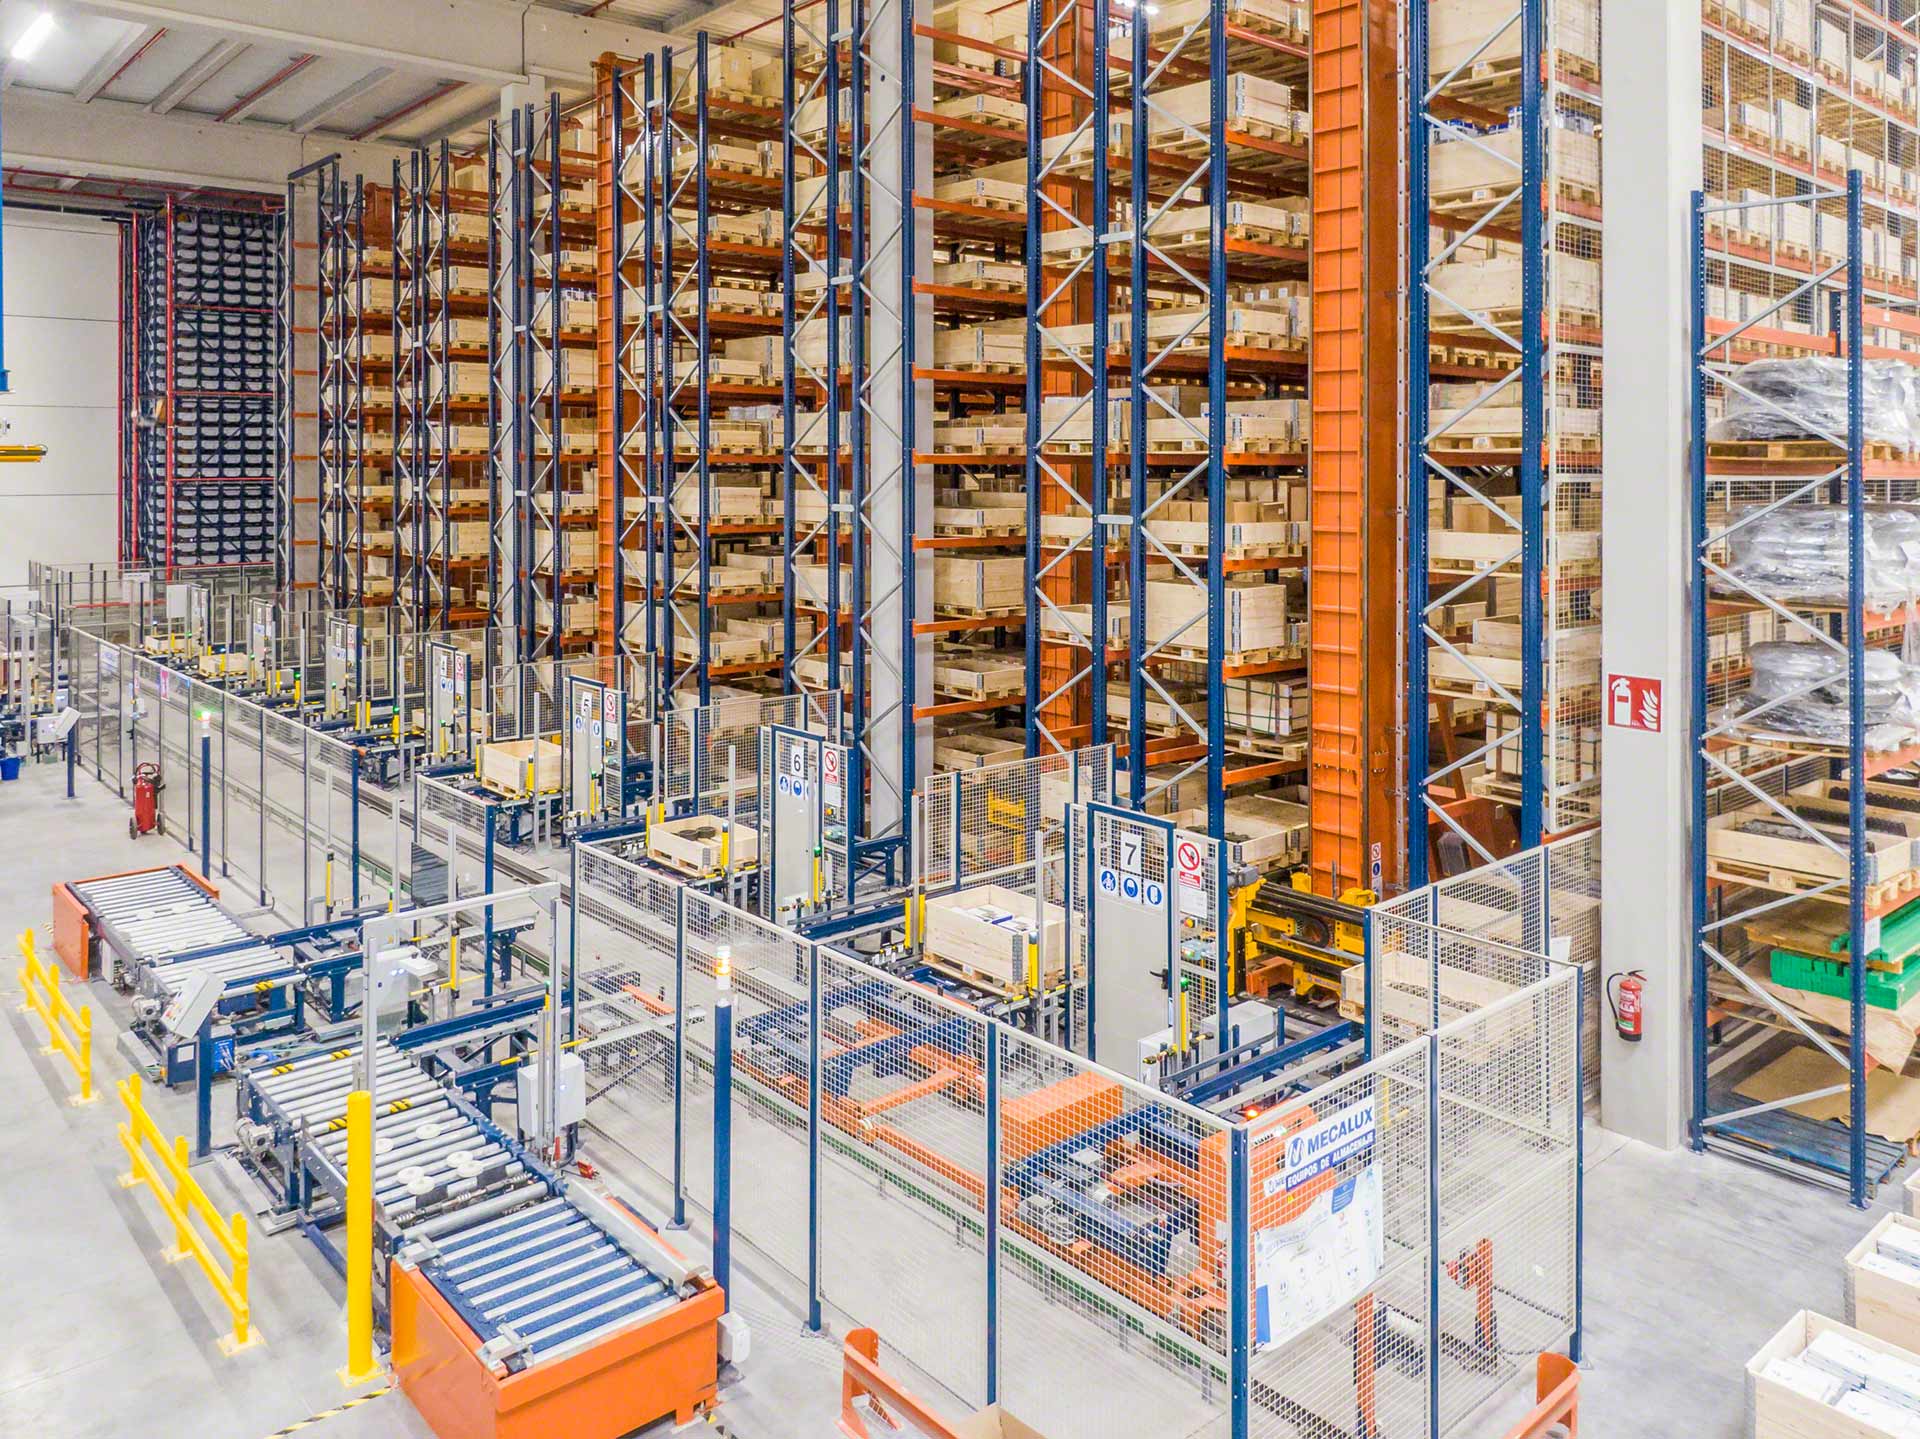 Automated storage and retrieval systems carry out advanced, safe goods management